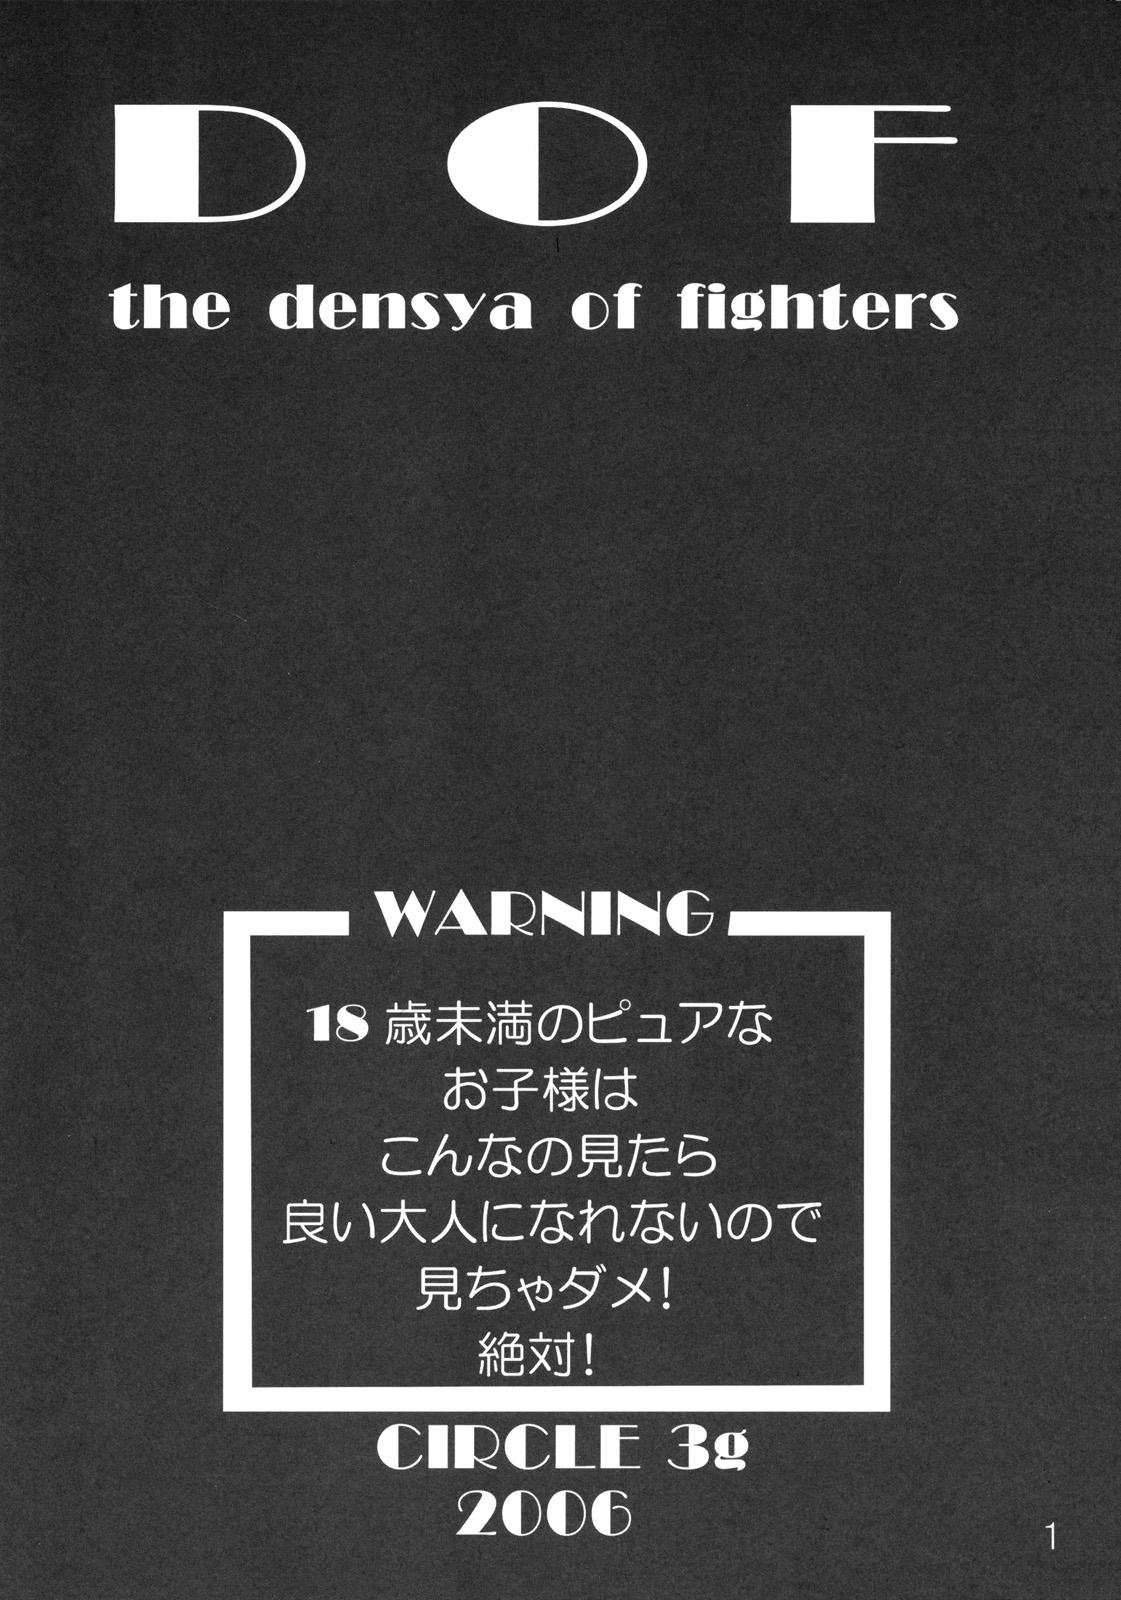 Vadia DOF the densya of fighters - King of fighters Fatal fury Teenfuns - Page 2